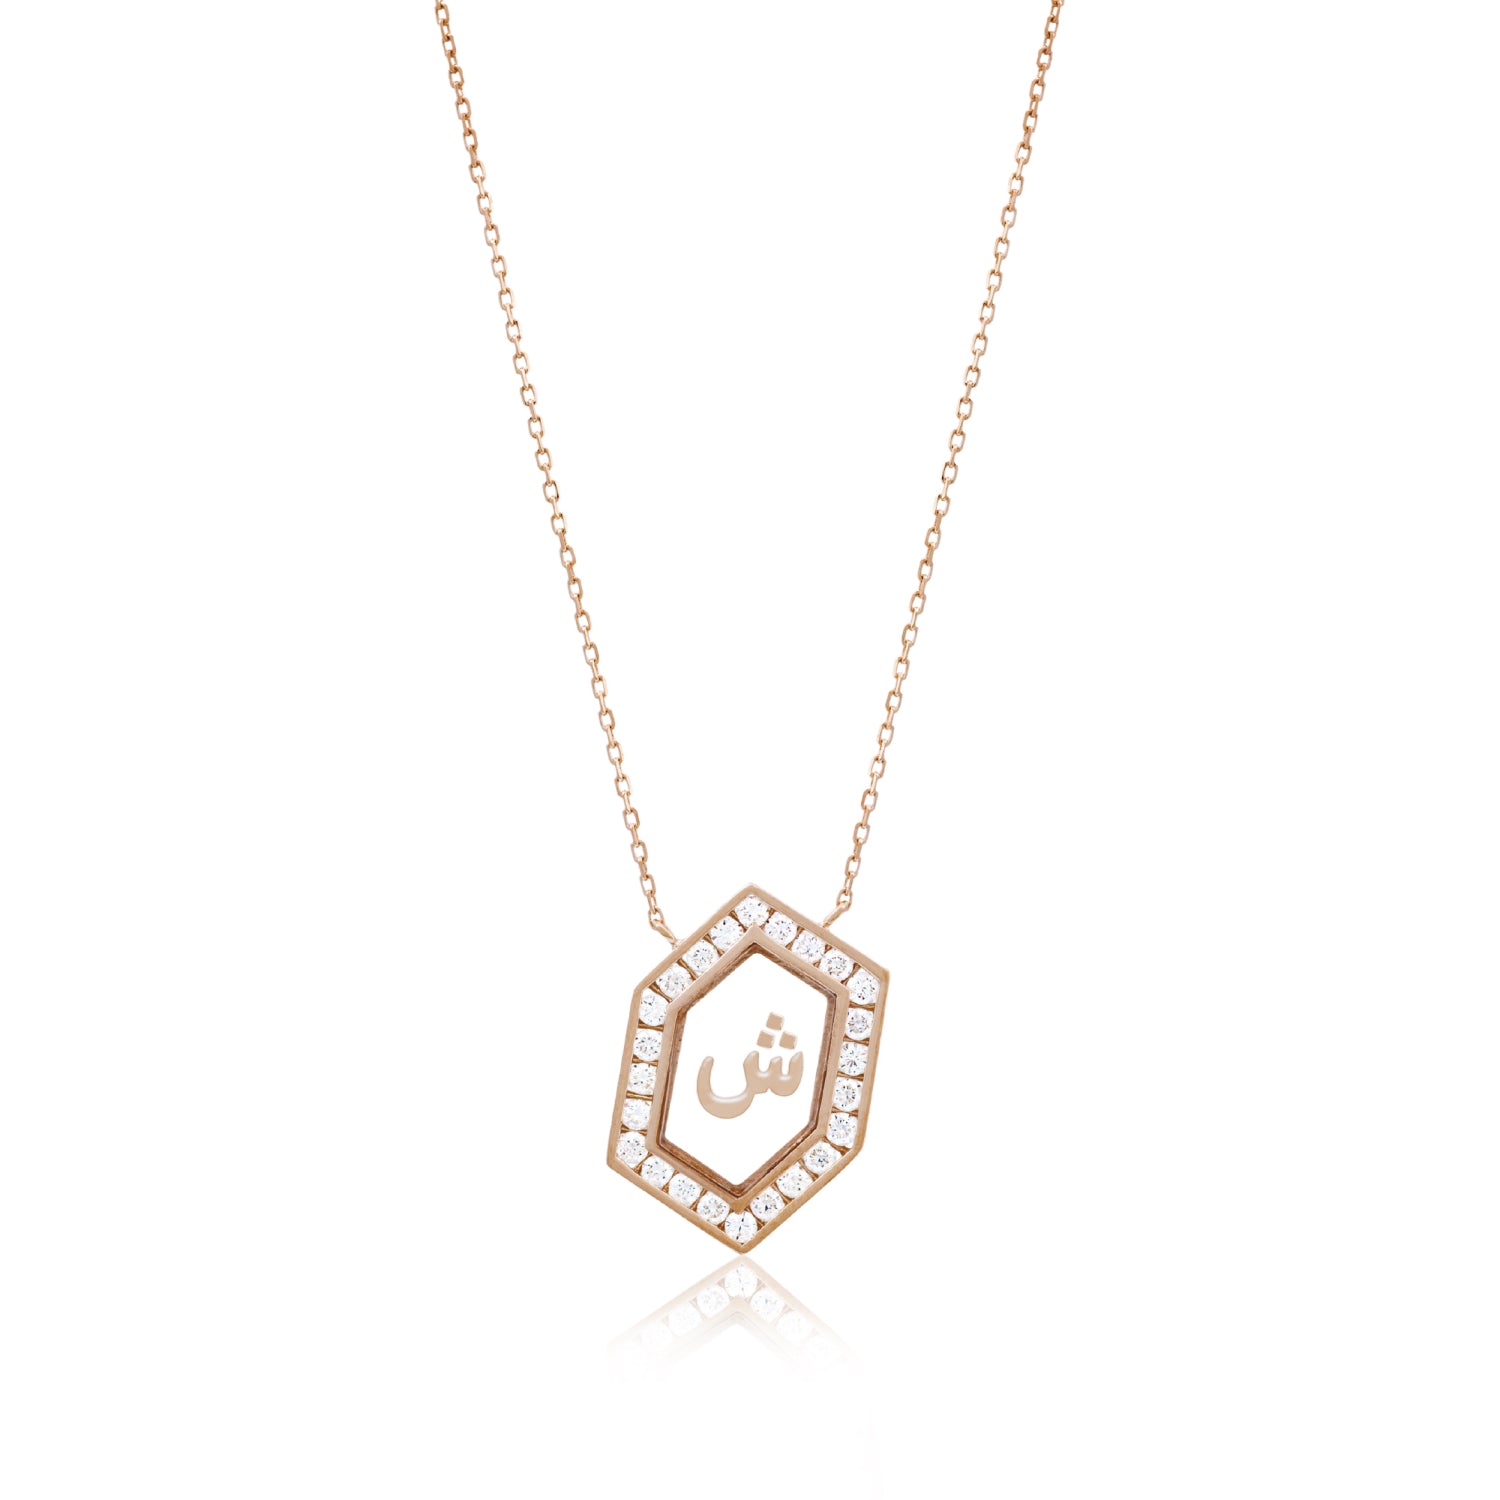 Qamoos 1.0 Letter ش Diamond Necklace in Rose Gold